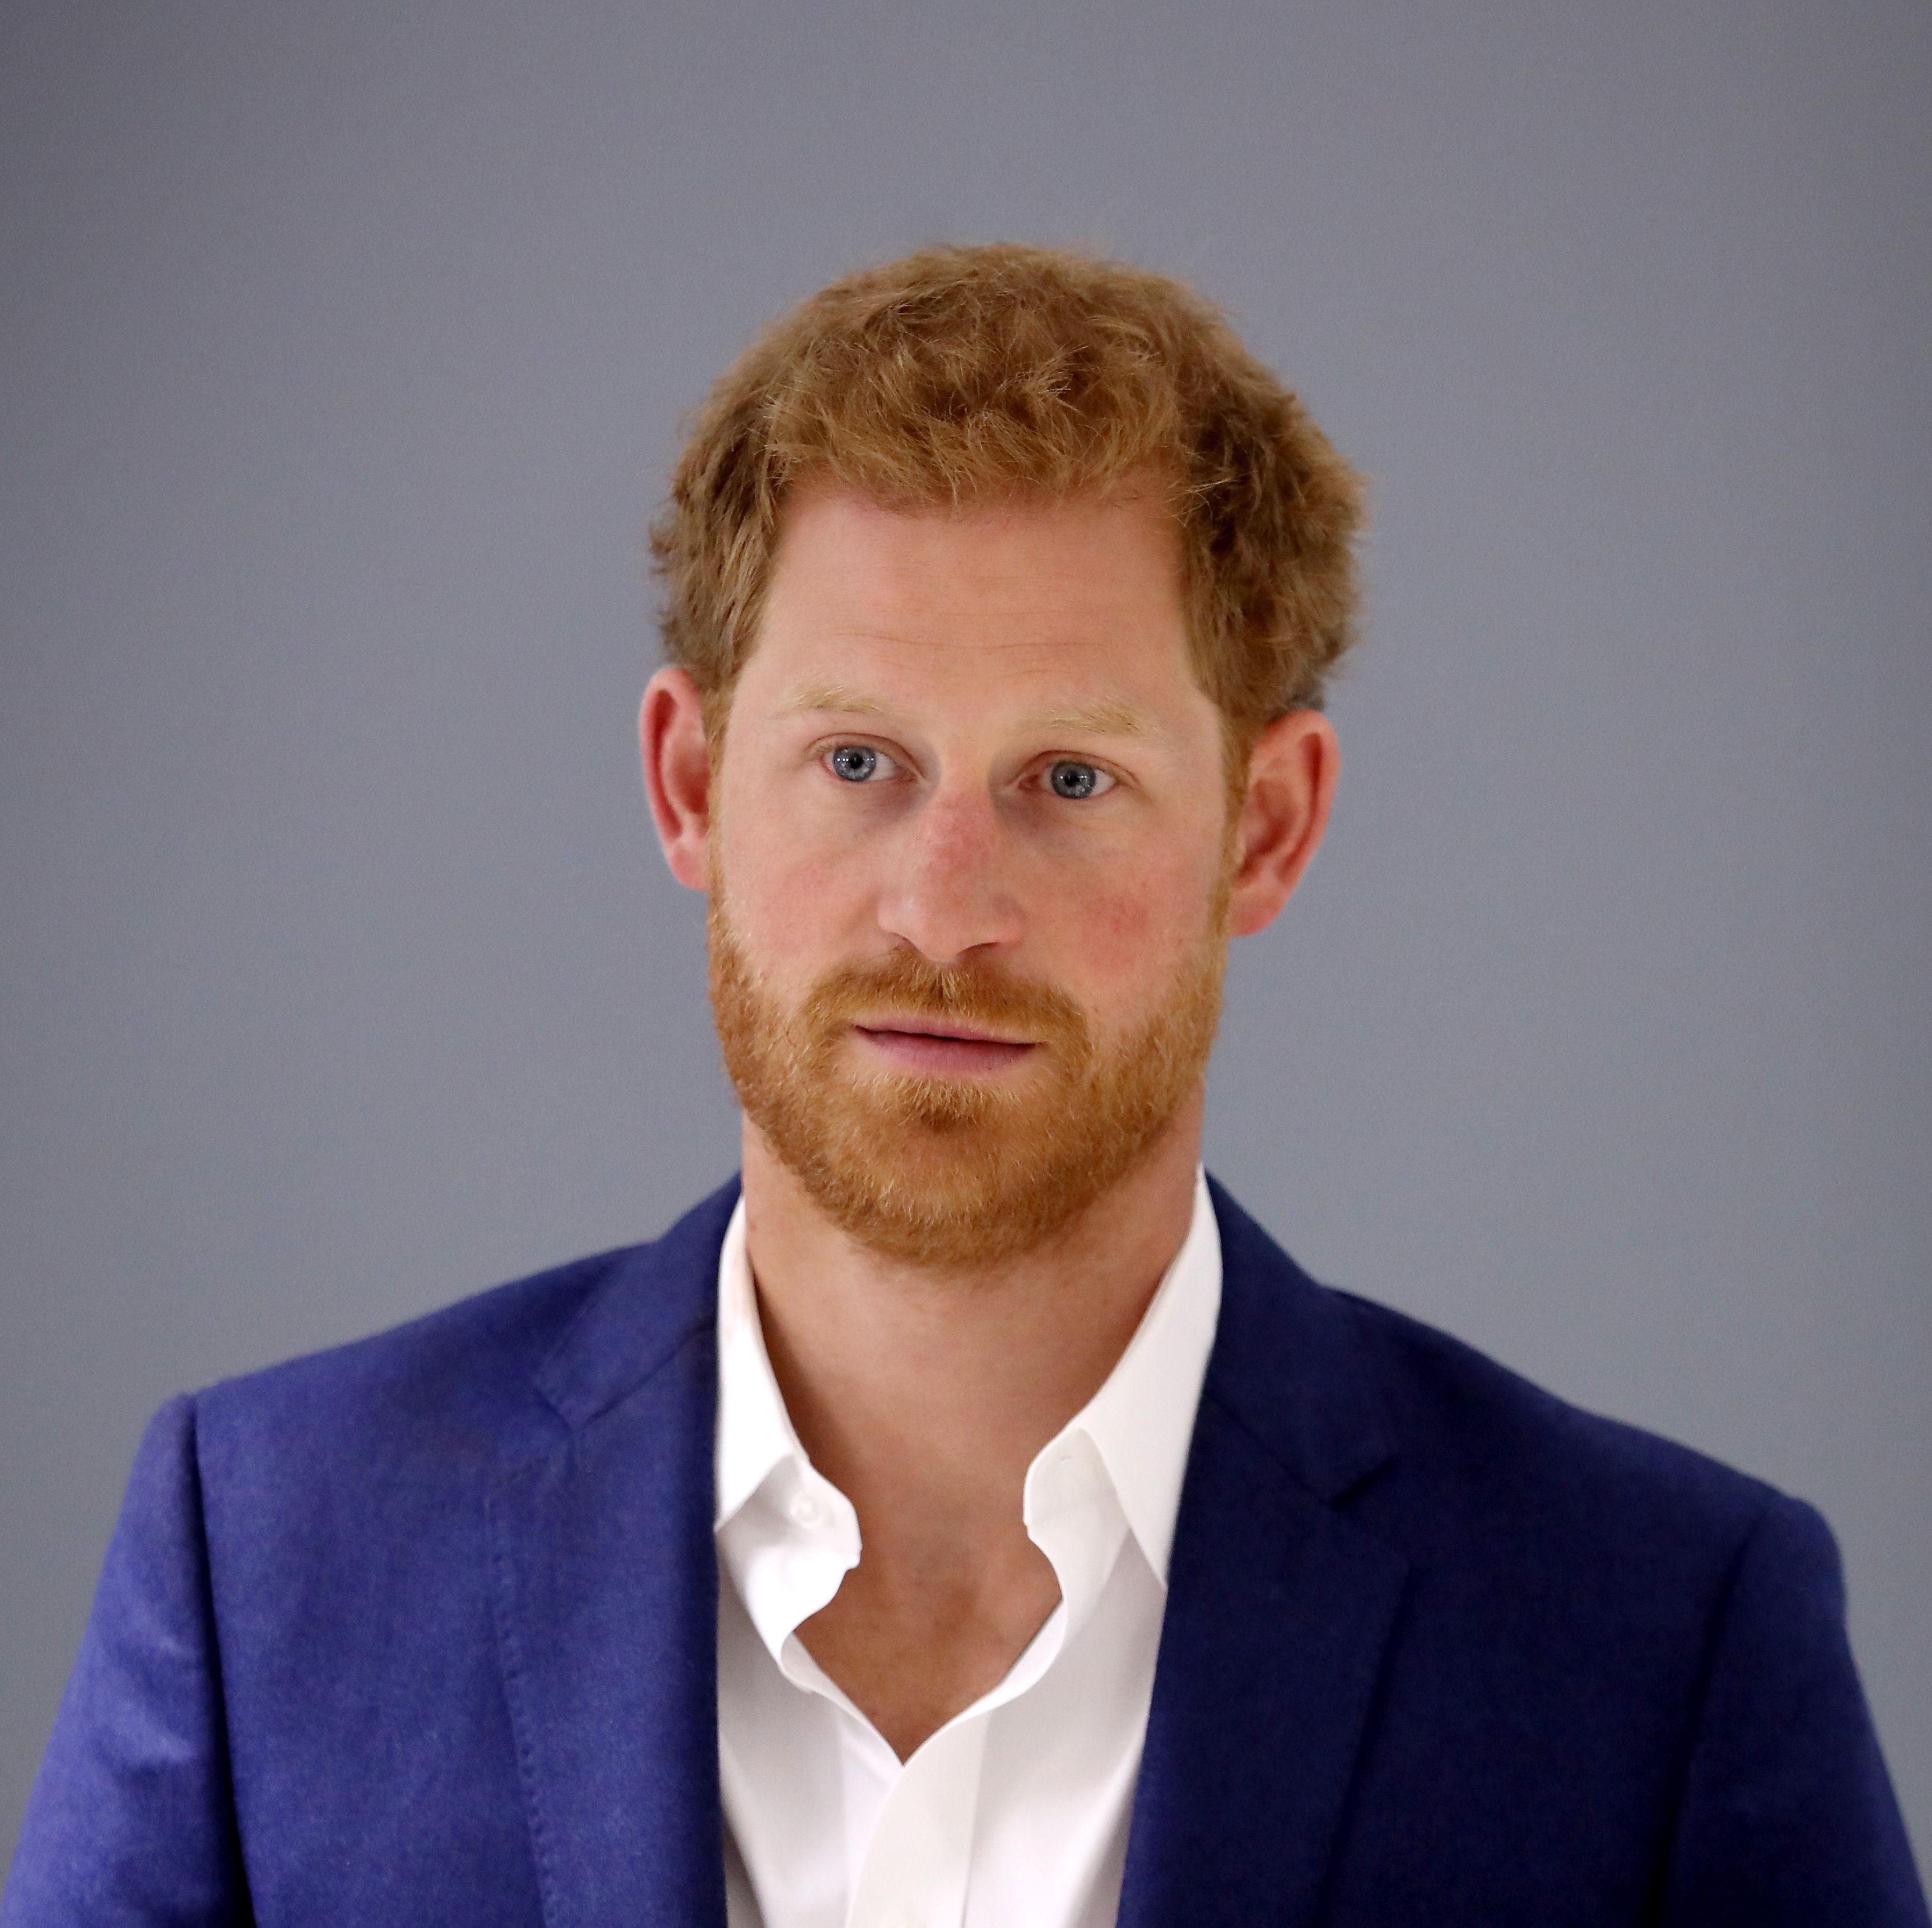 What Prince Harry Didn’t Say Was The Real Story in His Latest Television Interview